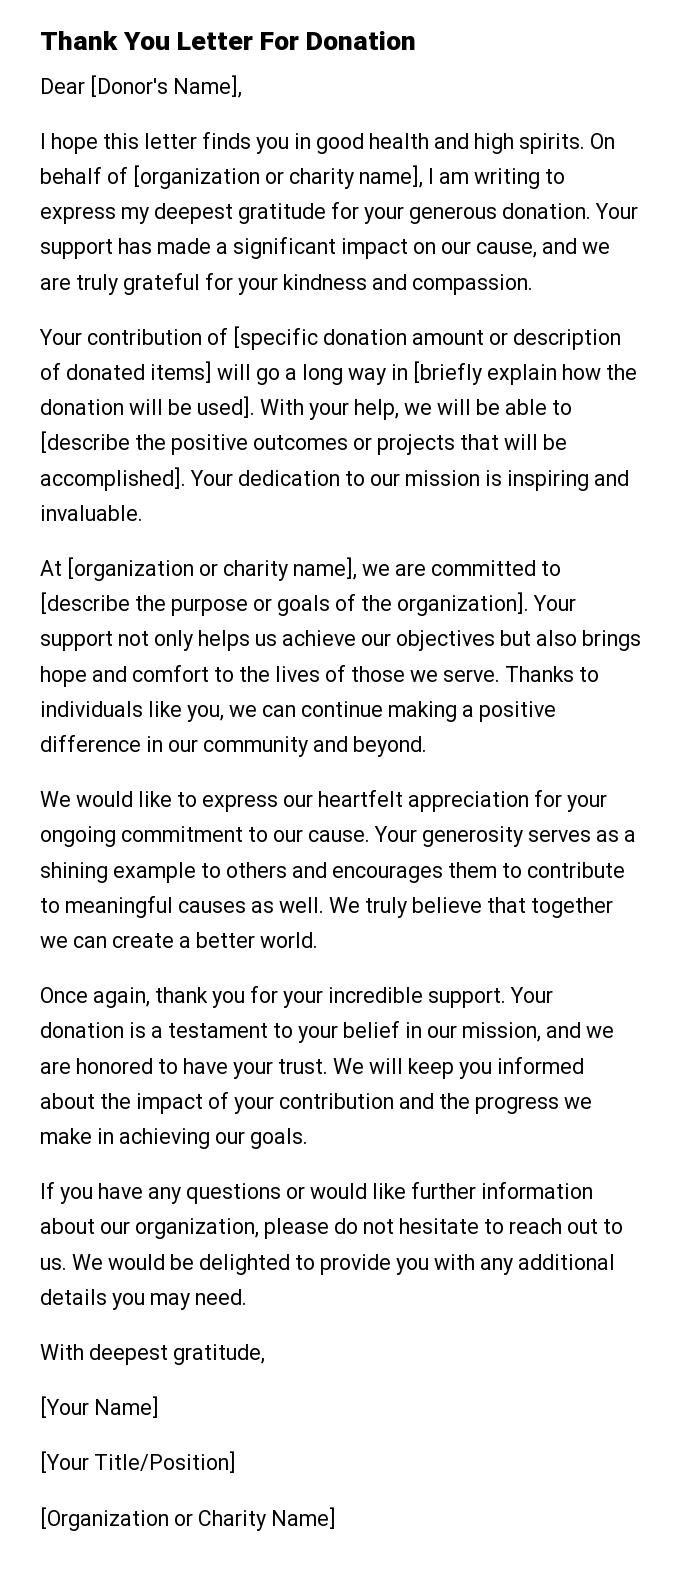 Thank You Letter For Donation